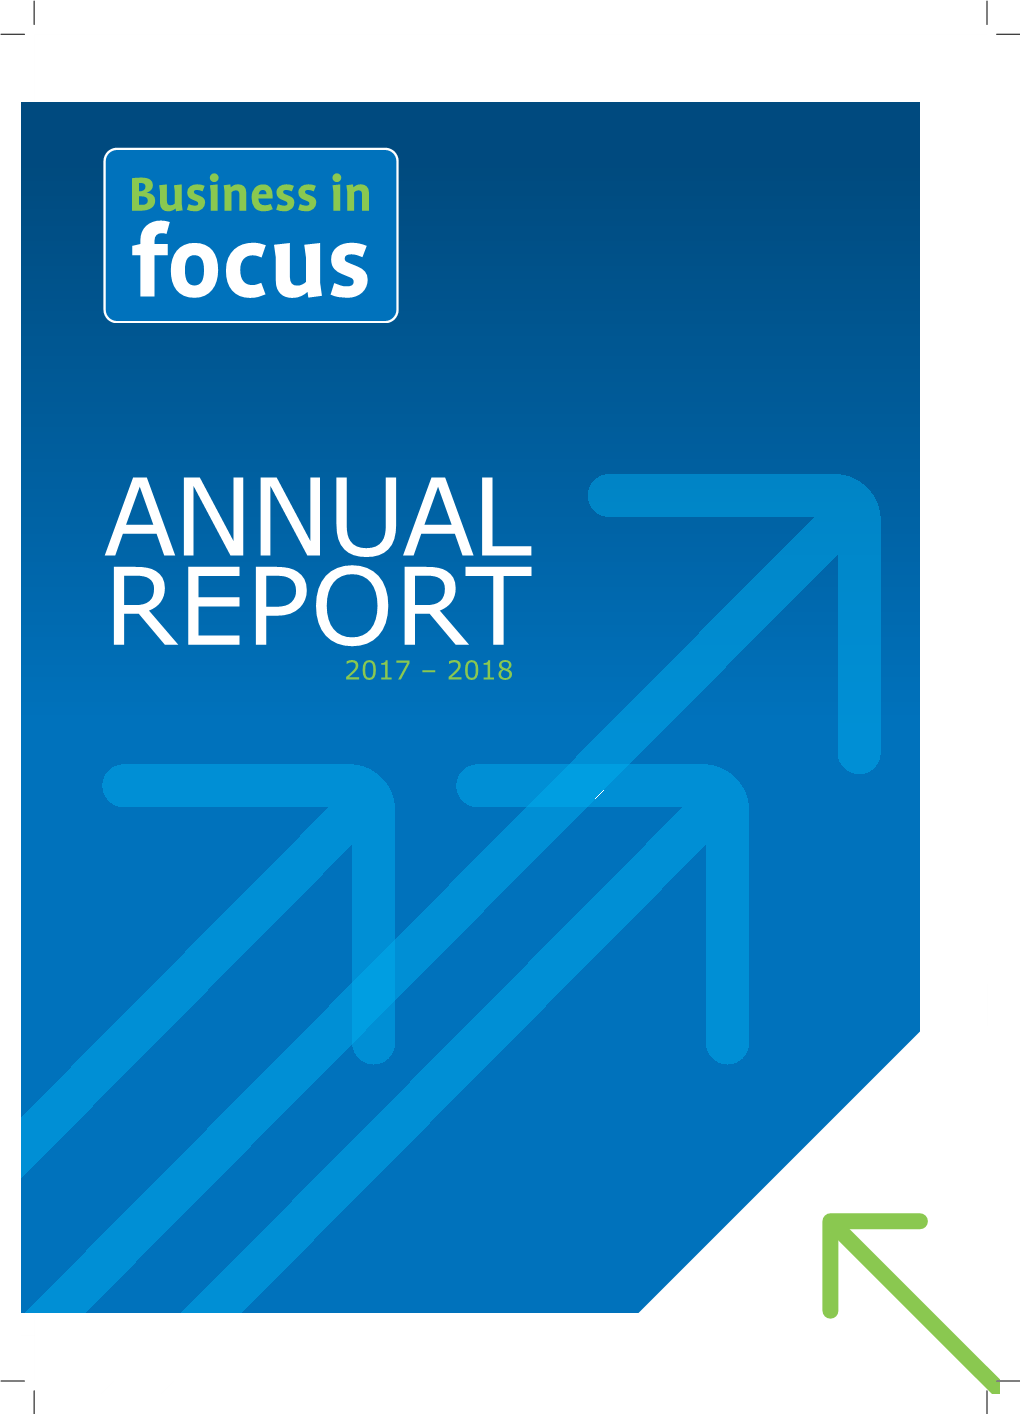 Business in Focus Annual Report 2018 English.Indd